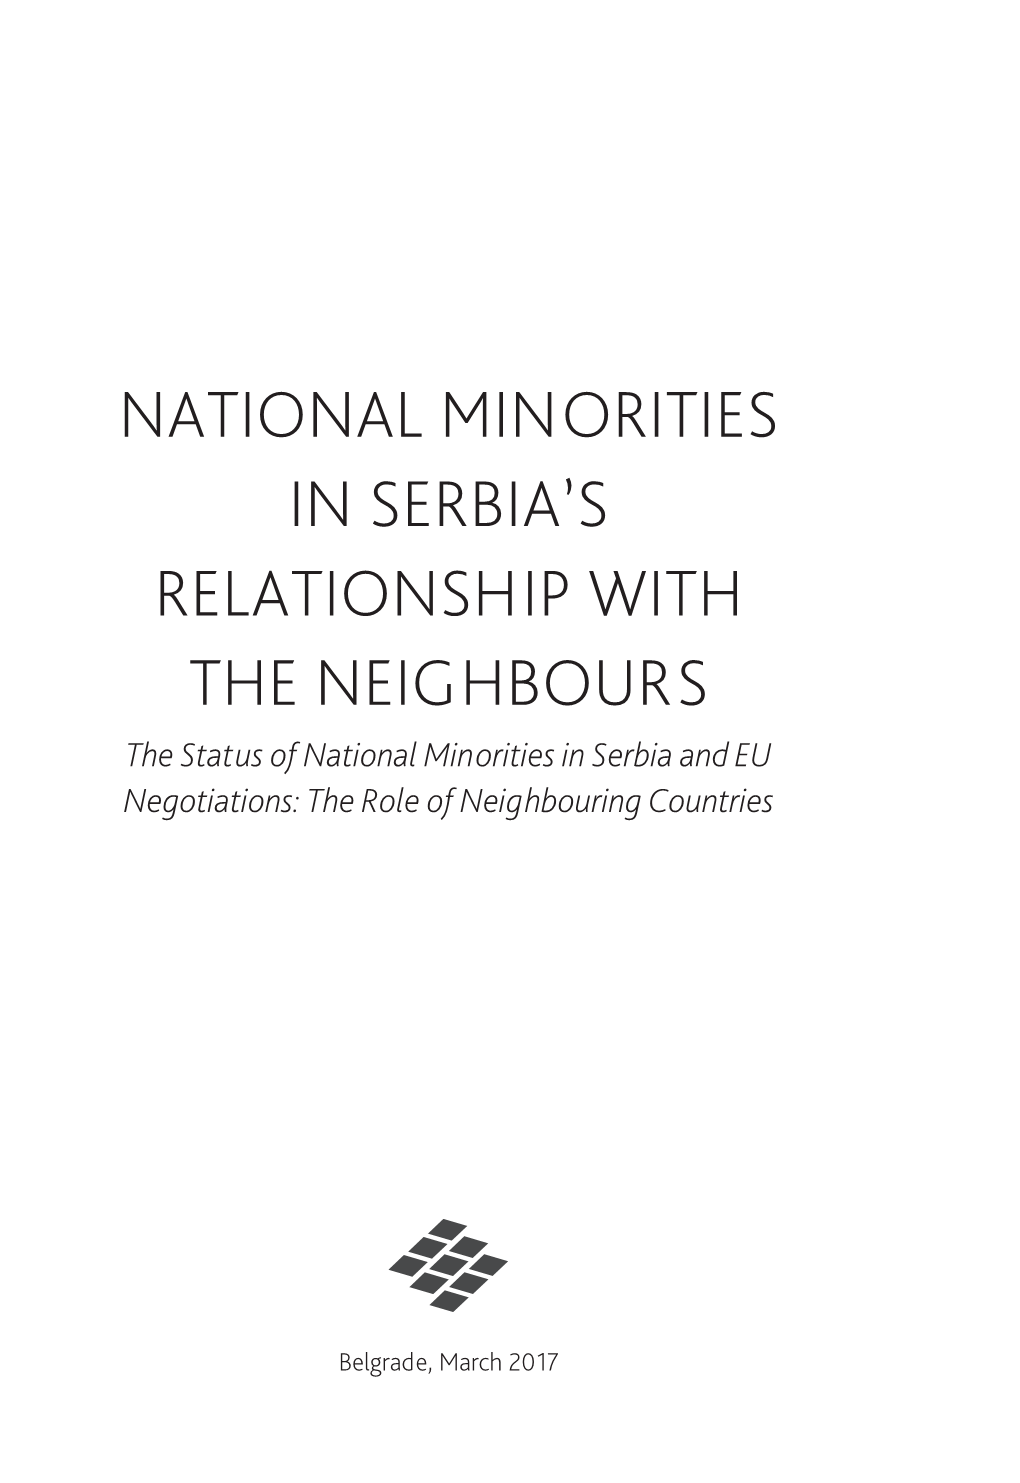 The Status of National Minorities in Serbia and EU Negotiations: the Role of Neighbouring Countries